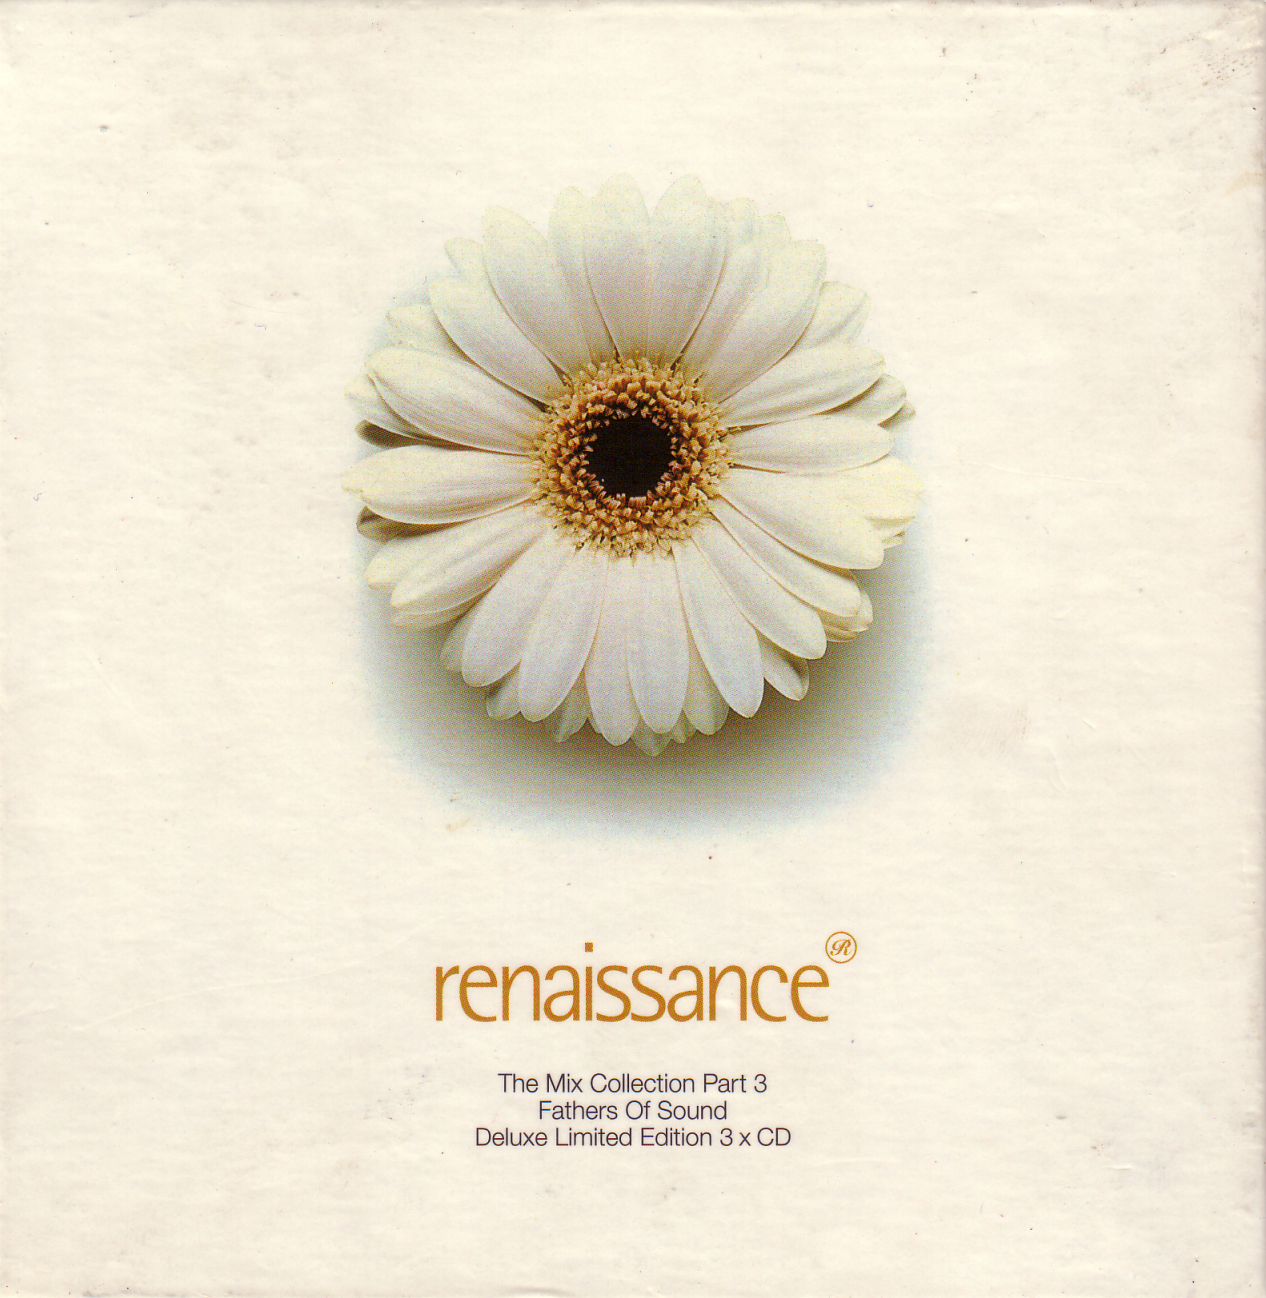 Renaissance - The Mix Collection Part 3 (1996) (Mixed by Fathers of Sound)